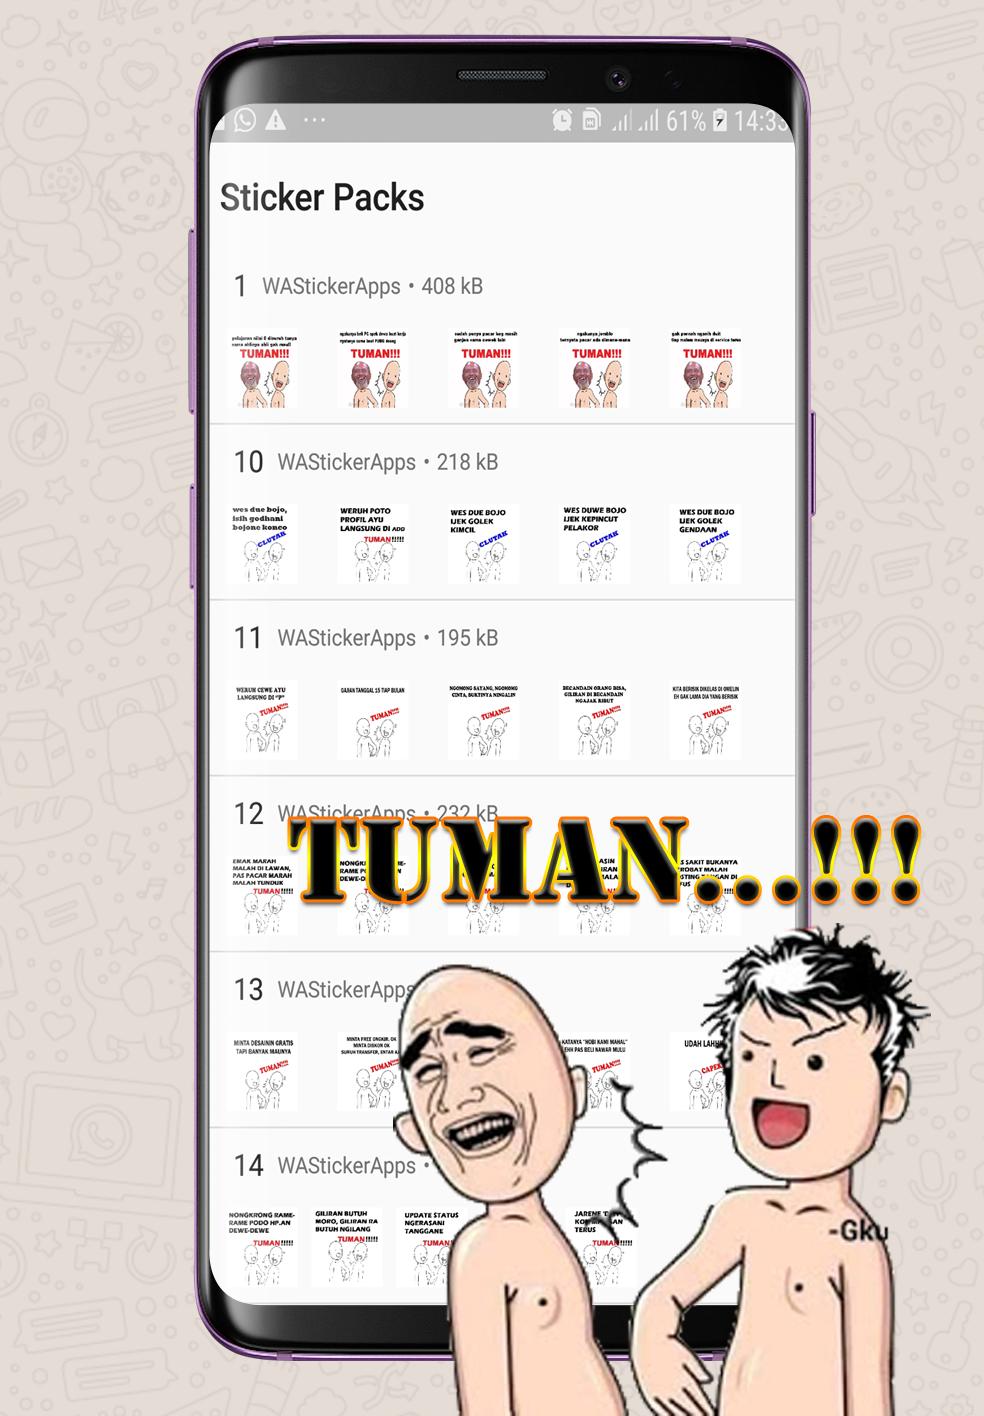 Stiker Meme Tuman Wastickerapps For Android Apk Download